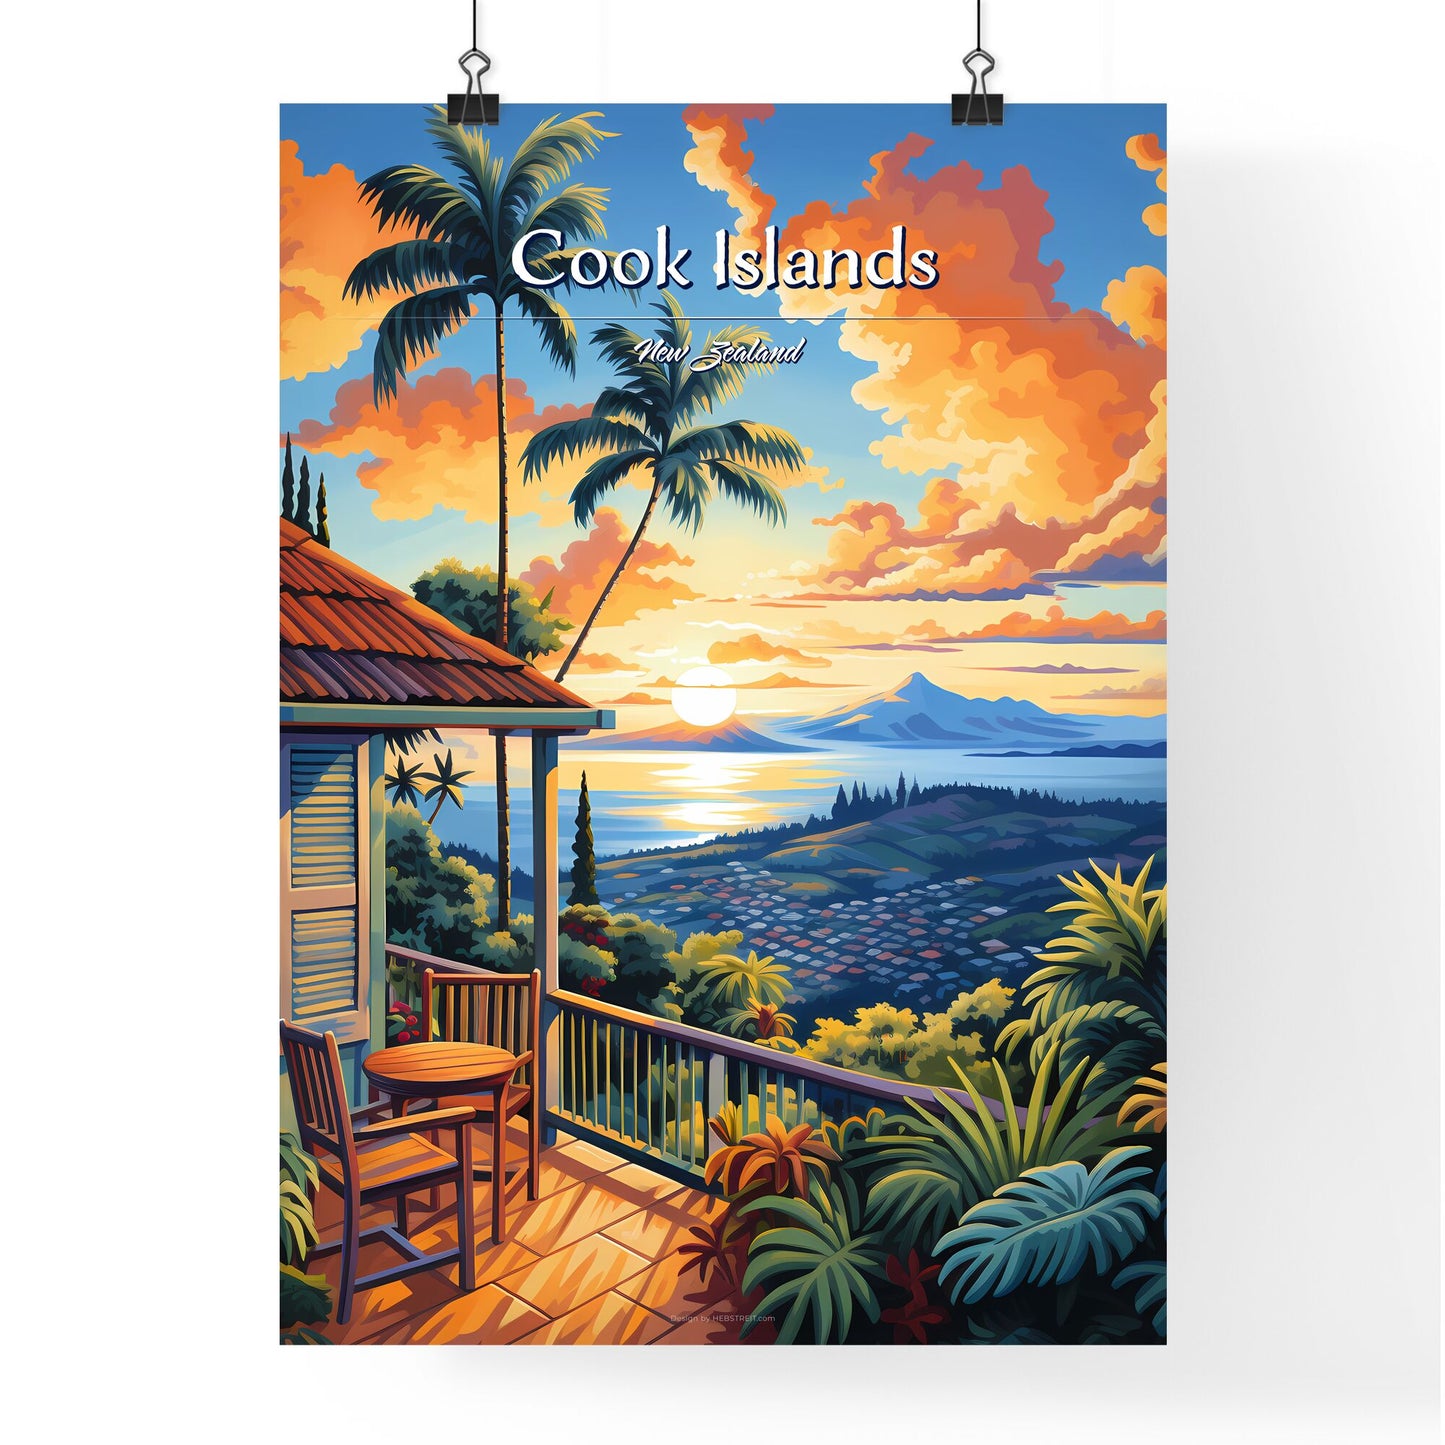 On the roofs of Cook Islands, New Zealand - Art print of a painting of a house overlooking a valley with palm trees and a sunset Default Title